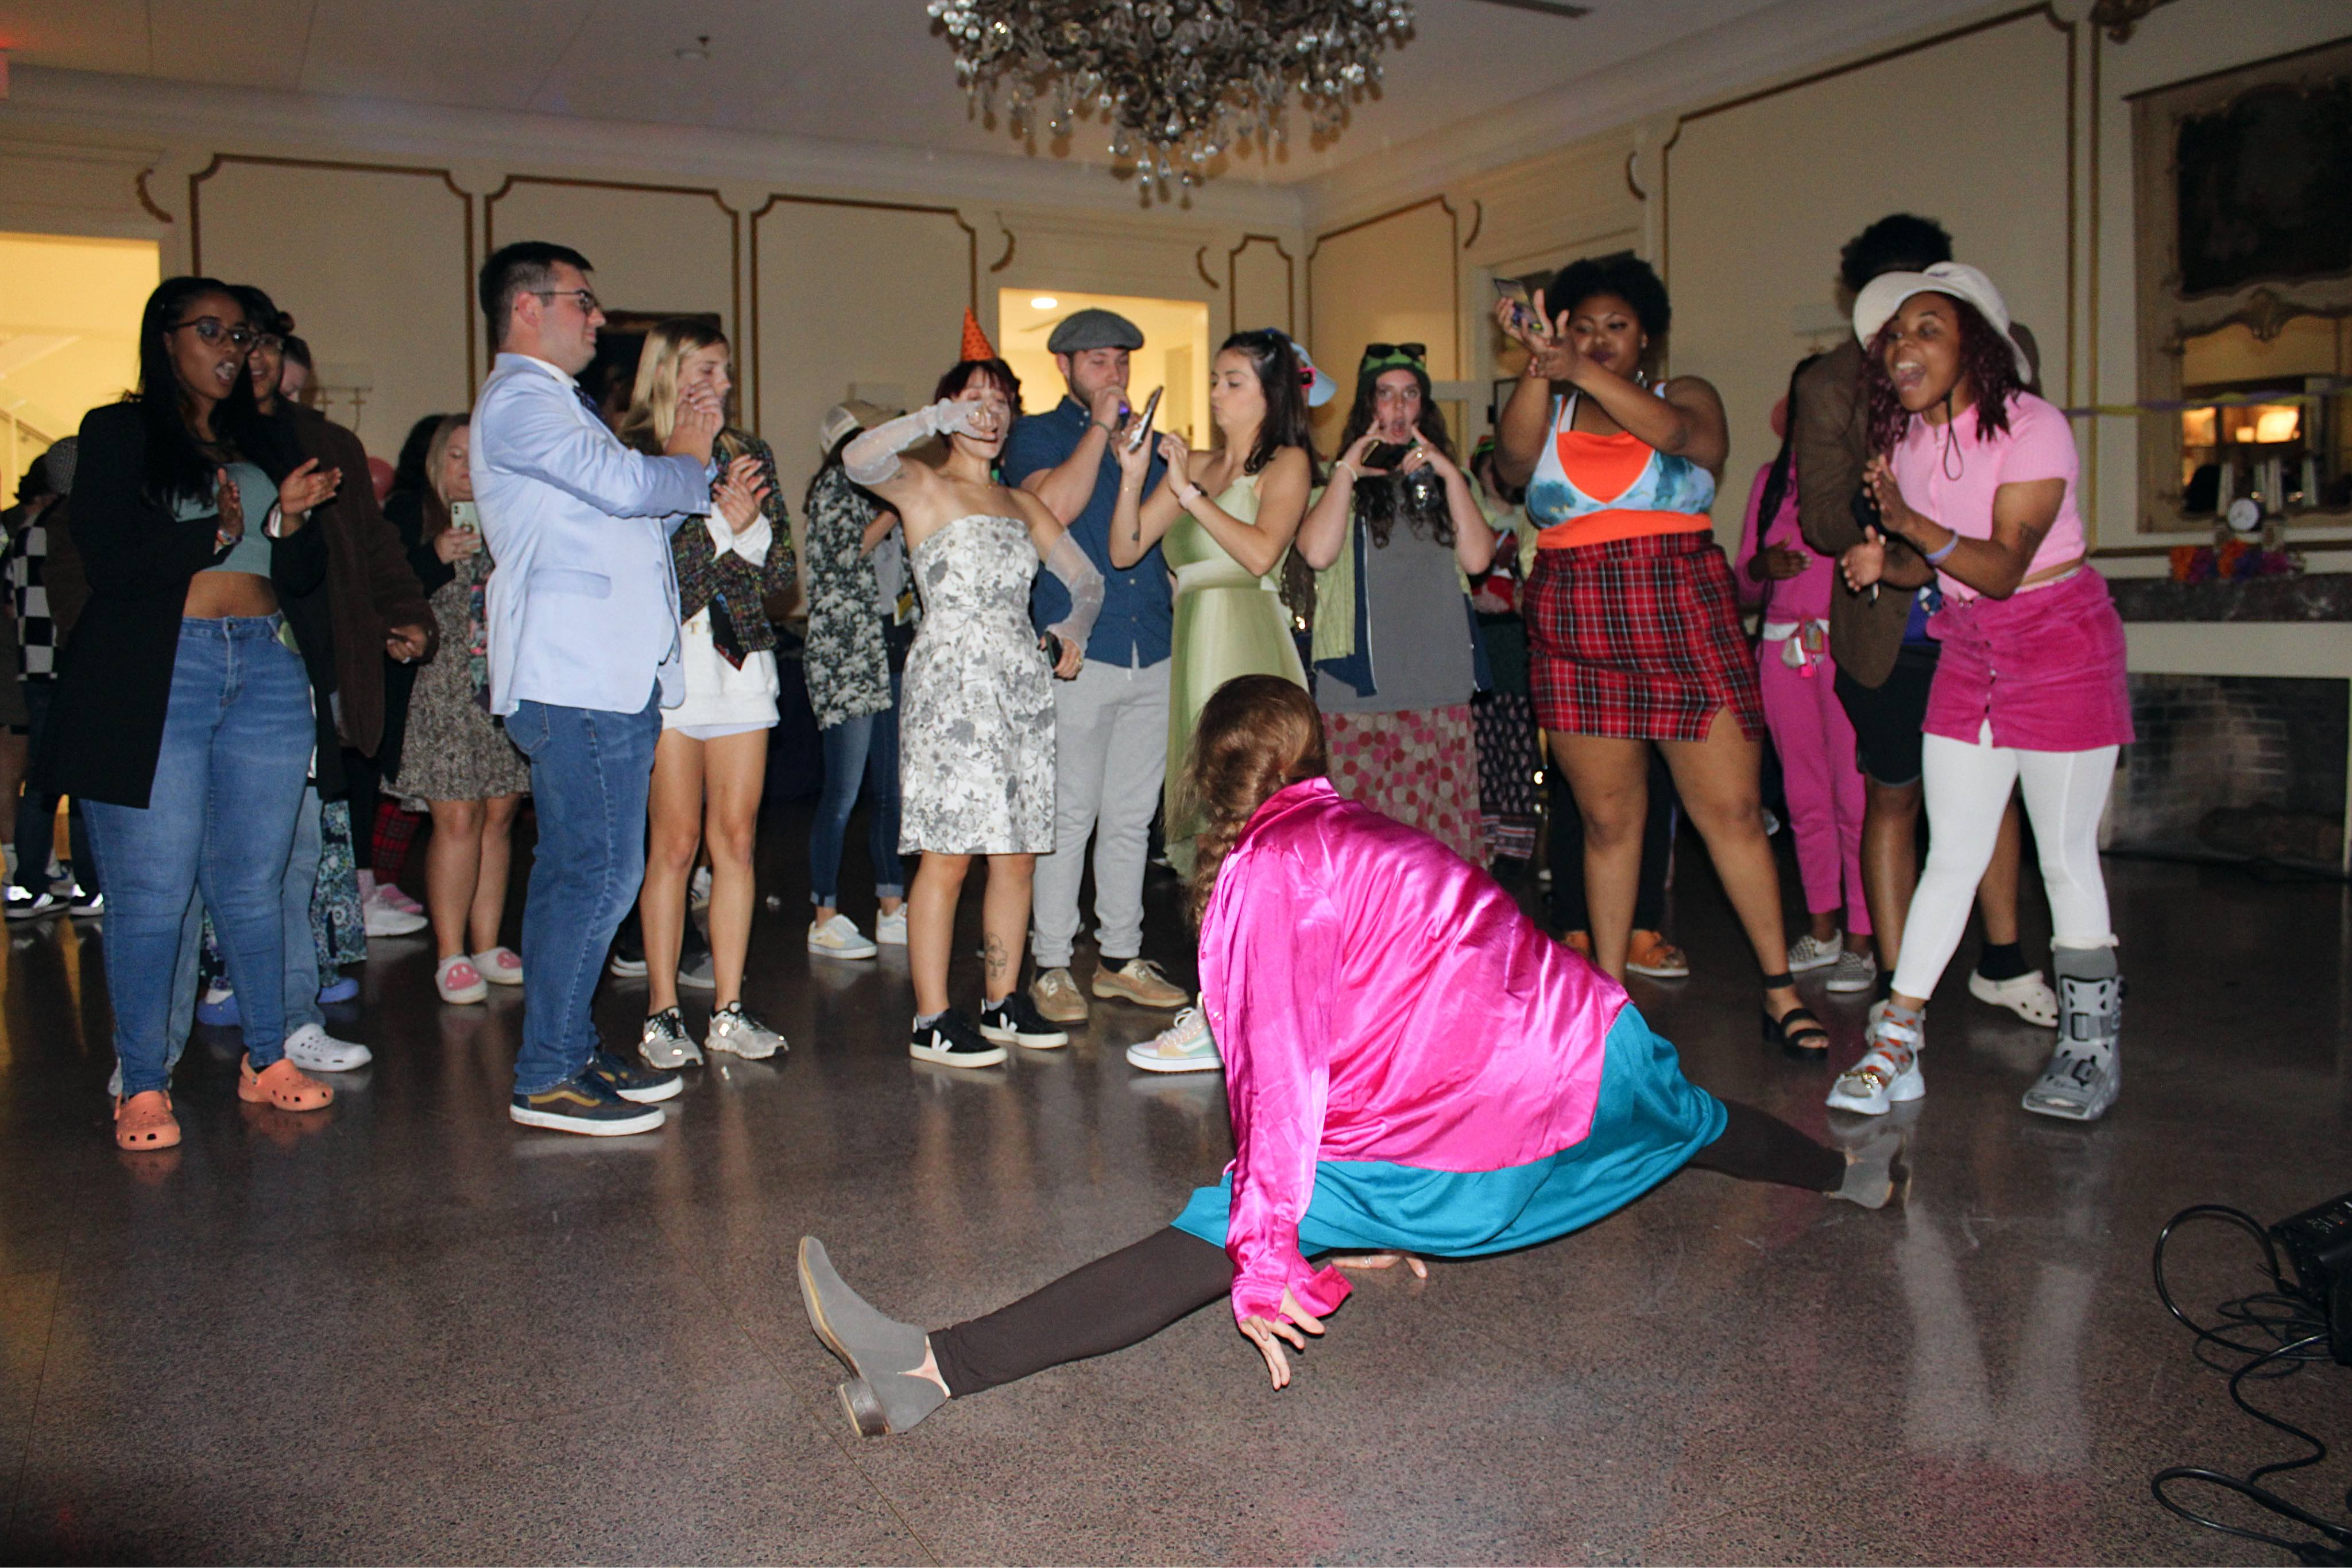 Laville resident doing the splits at Laville Tacky Prom